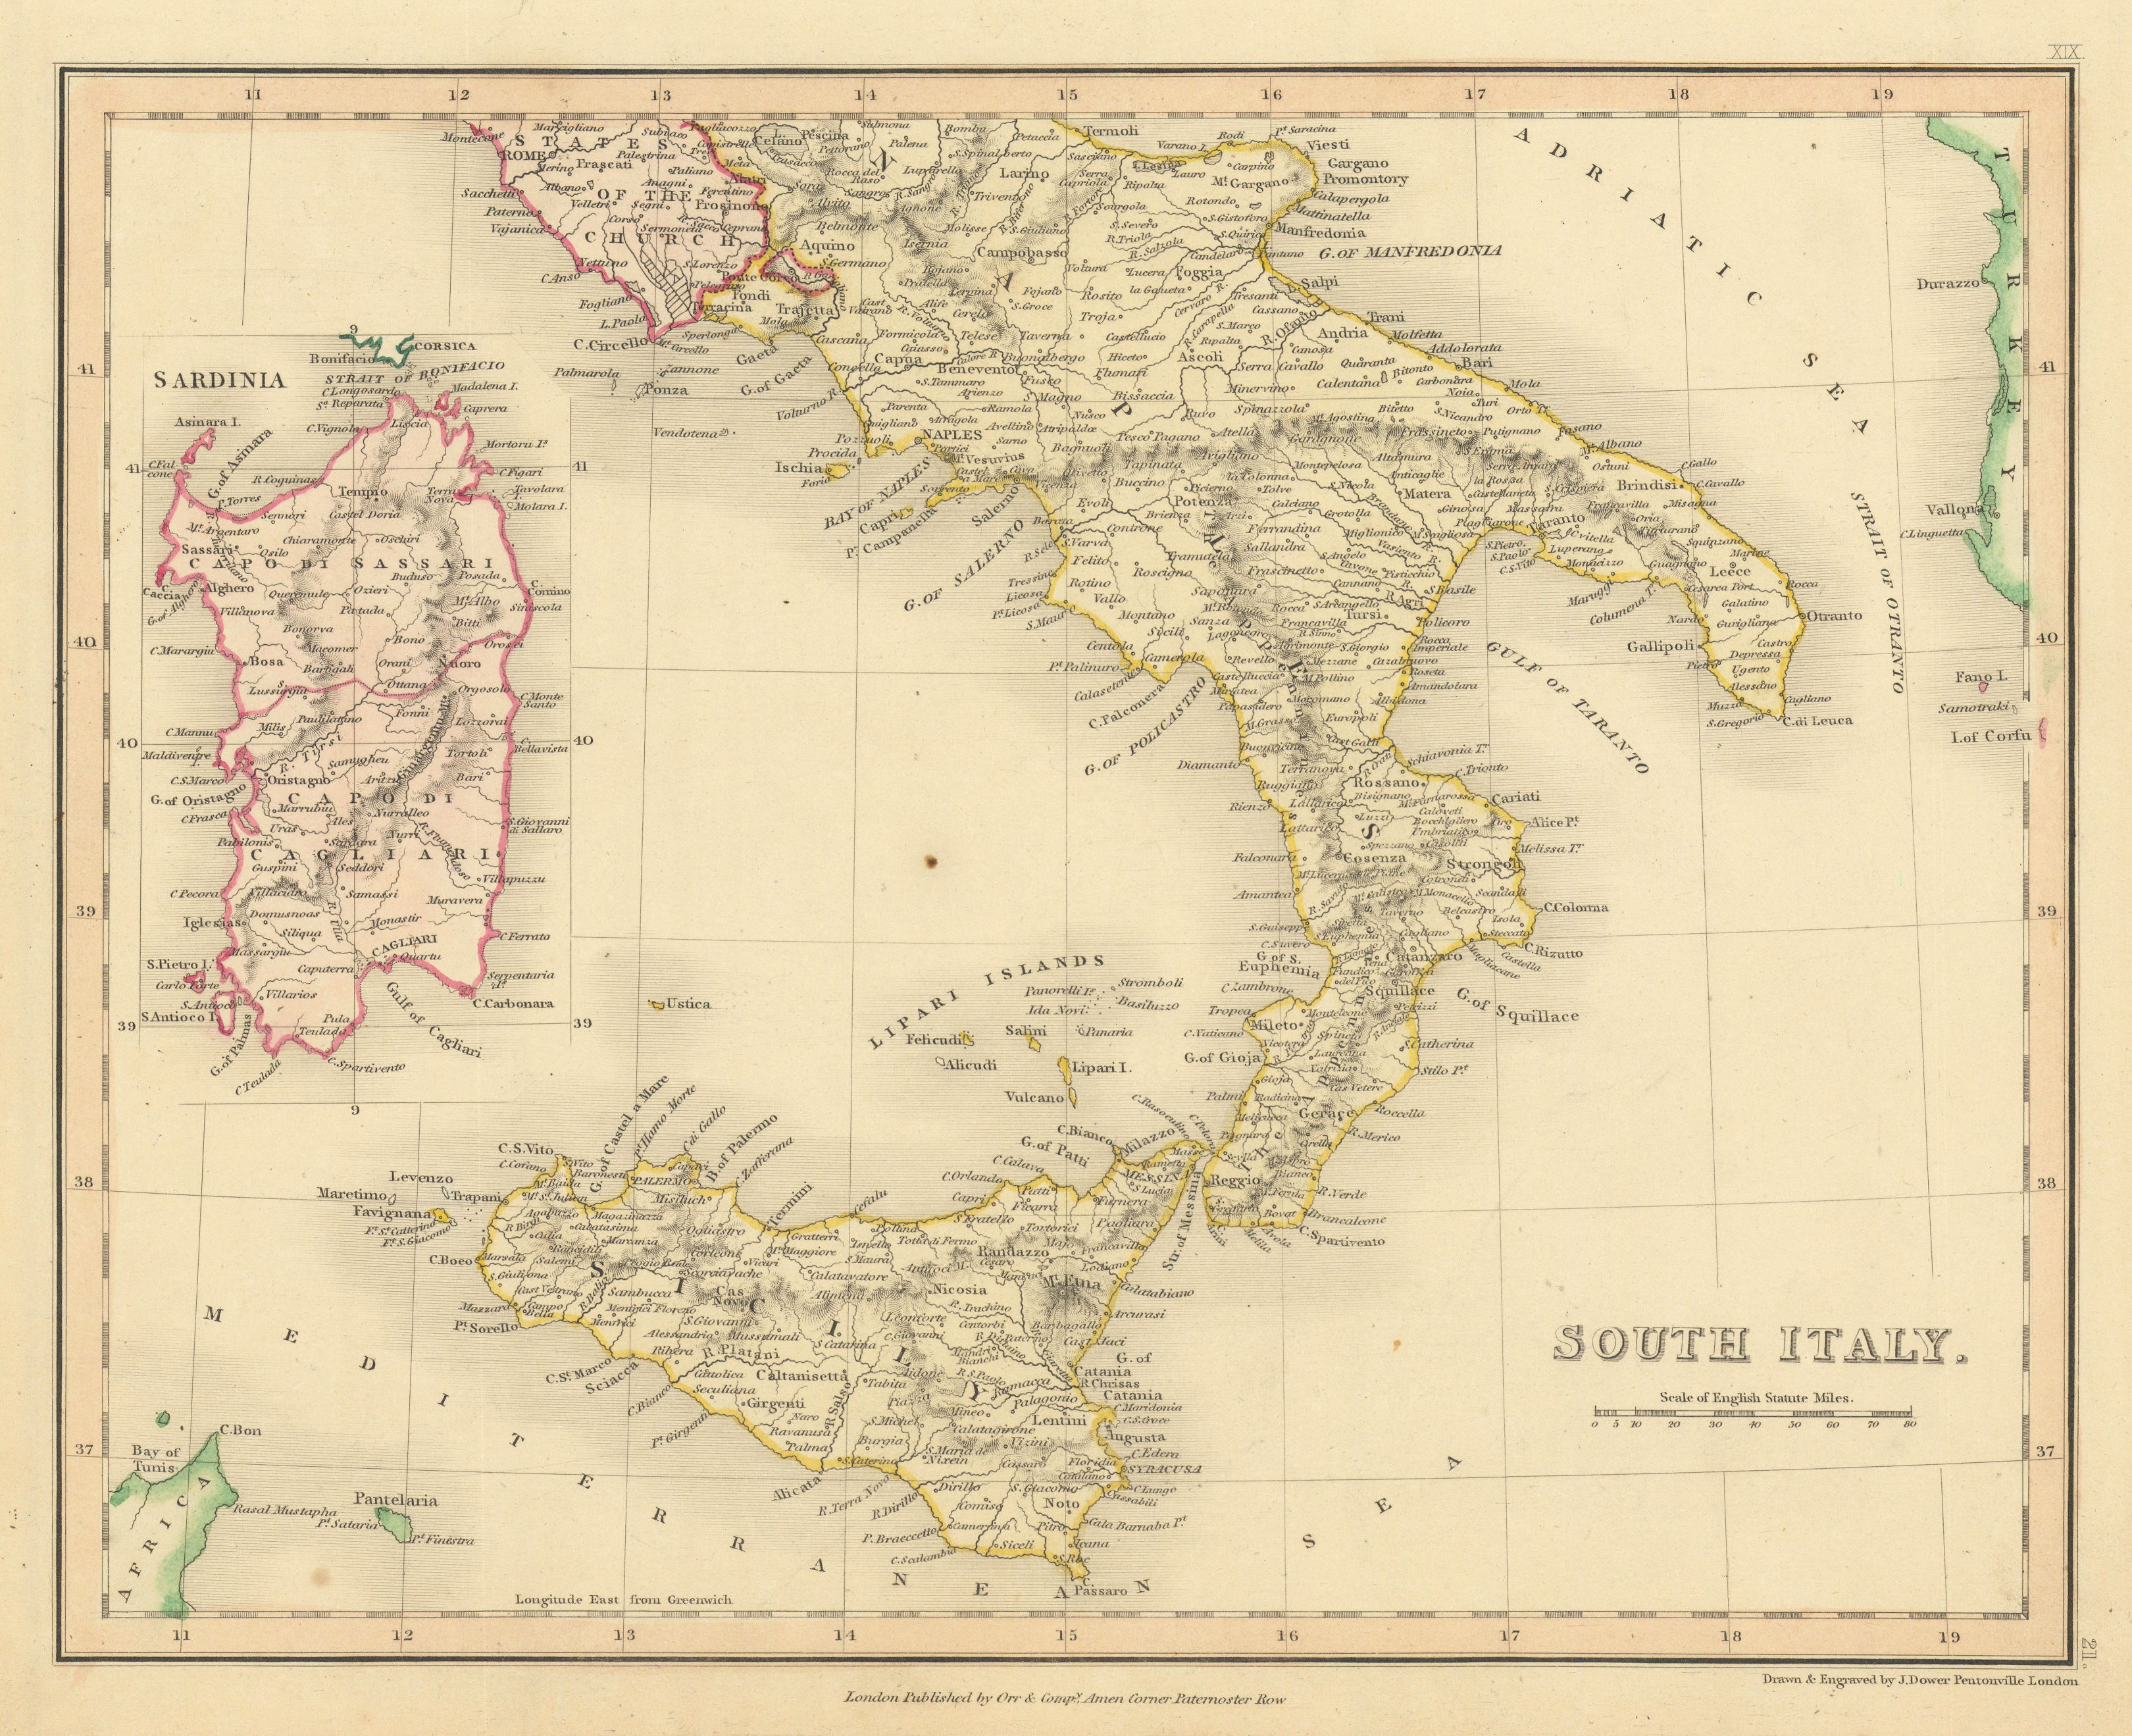 Associate Product South Italy by John Dower. Sicily Naples & Sardinia 1845 old antique map chart